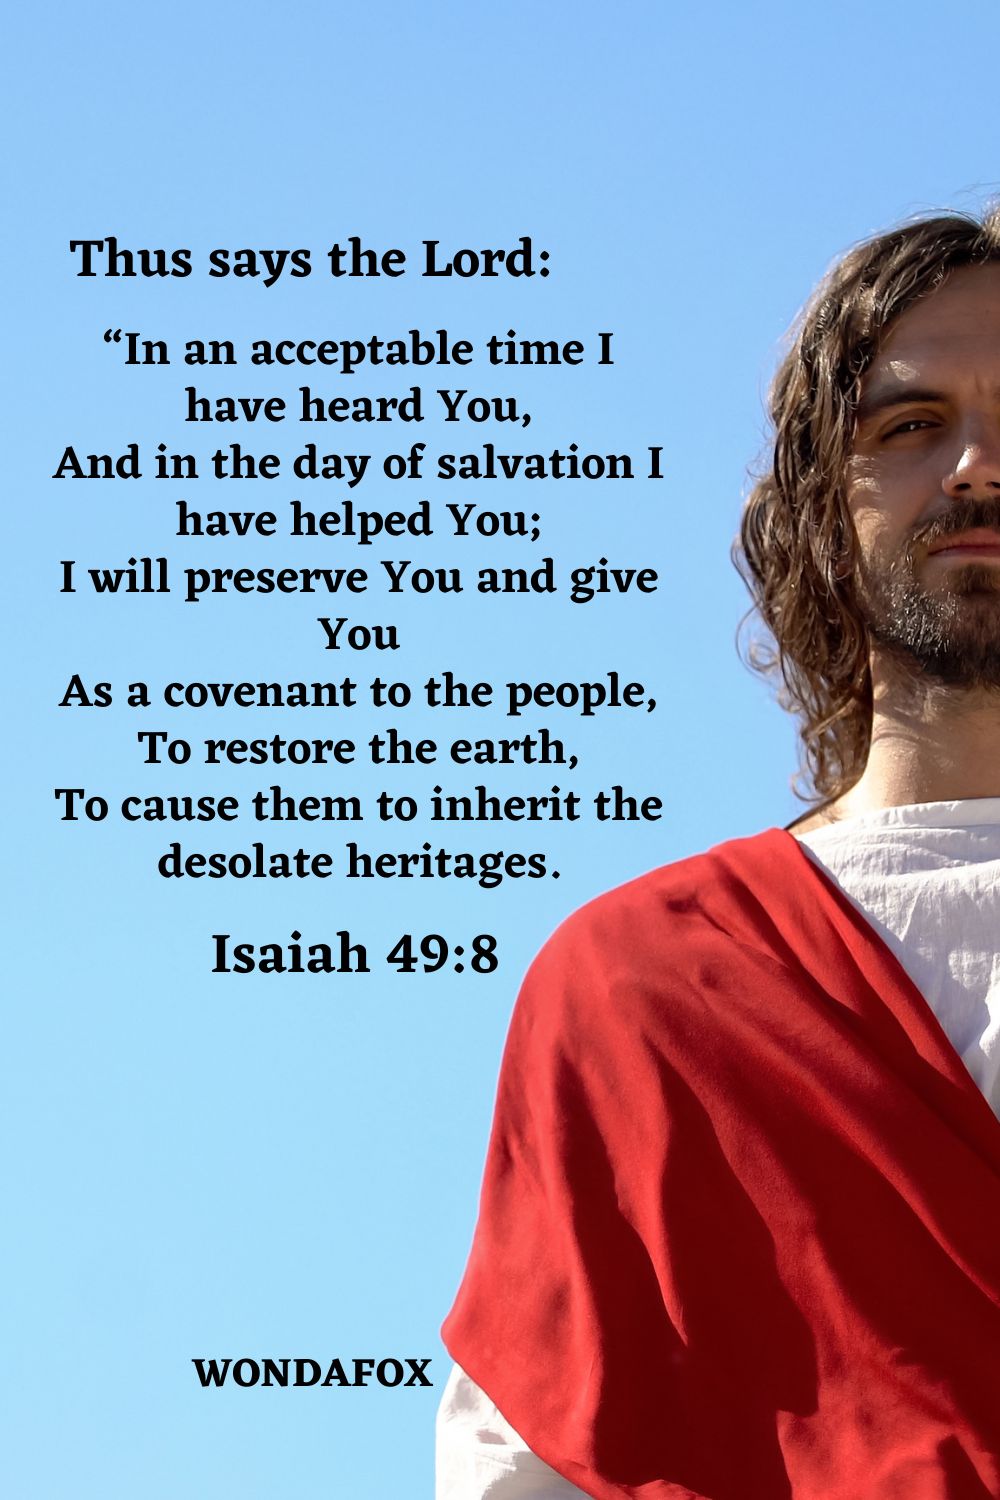 Thus says the Lord: “In an acceptable time I have heard You, And in the day of salvation I have helped You; I will preserve You and give You As a covenant to the people, To restore the earth, To cause them to inherit the desolate heritages.
Isaiah 49:8